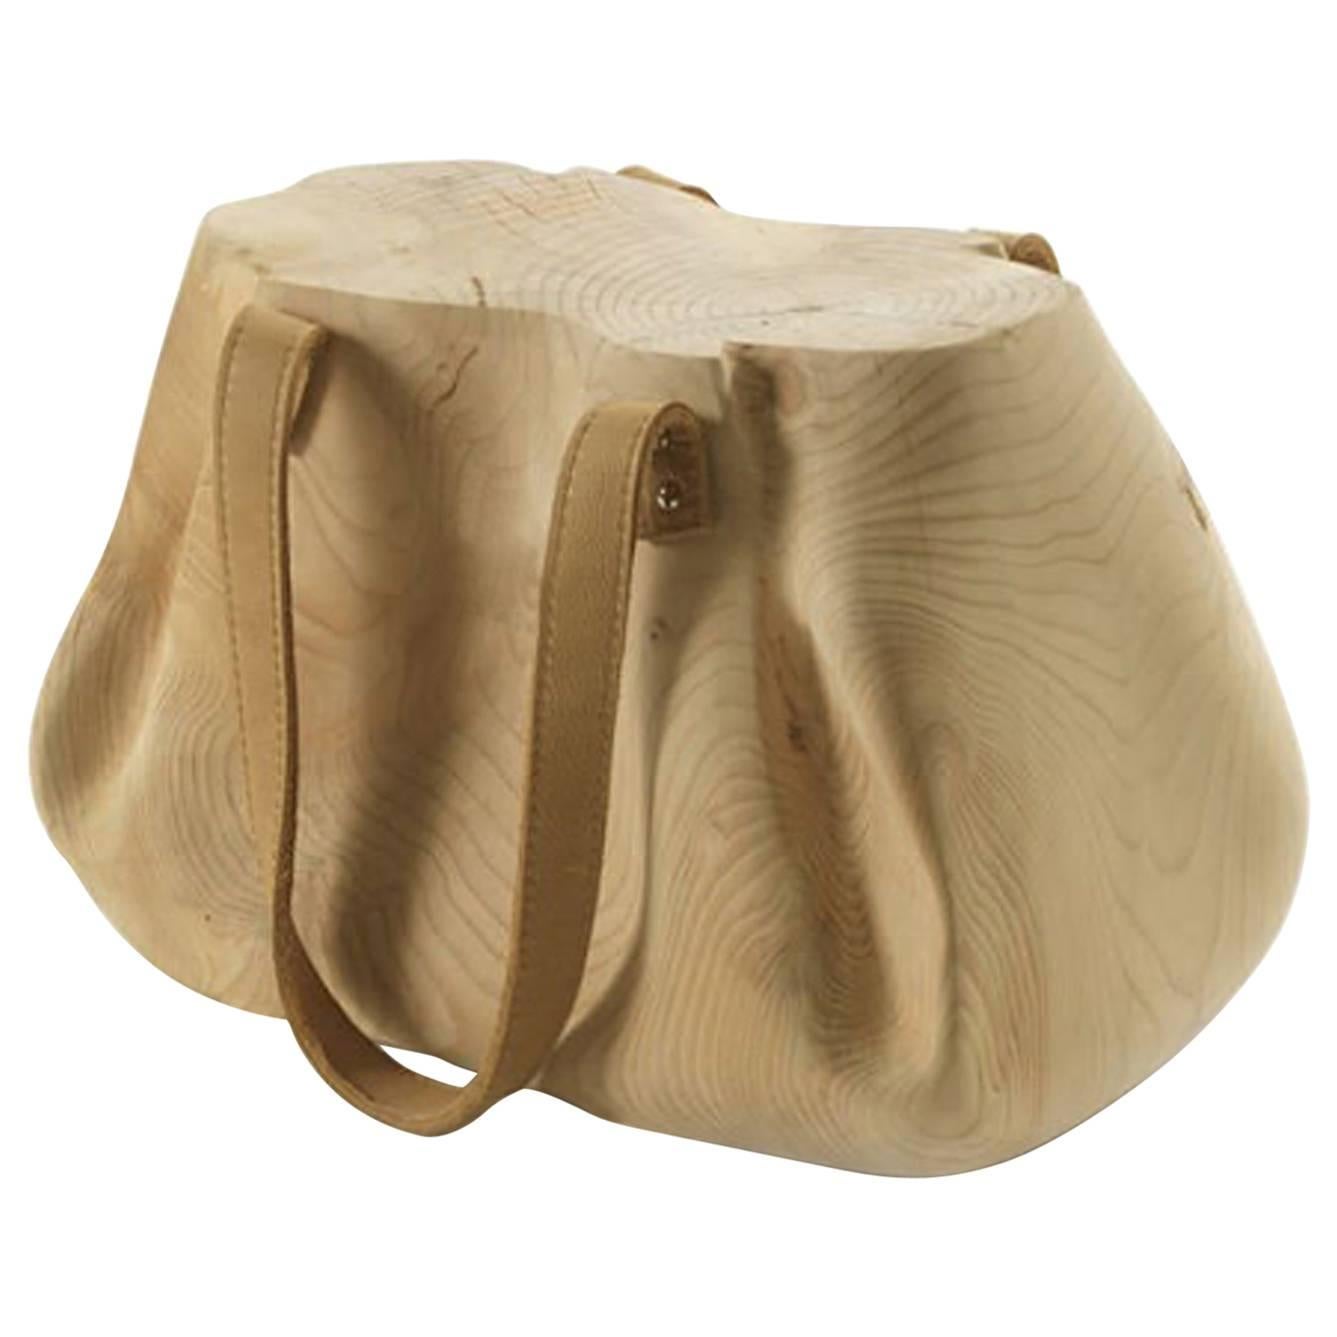 Bag Stool in Solid Natural Cedar Wood Hand-Carved with Leather